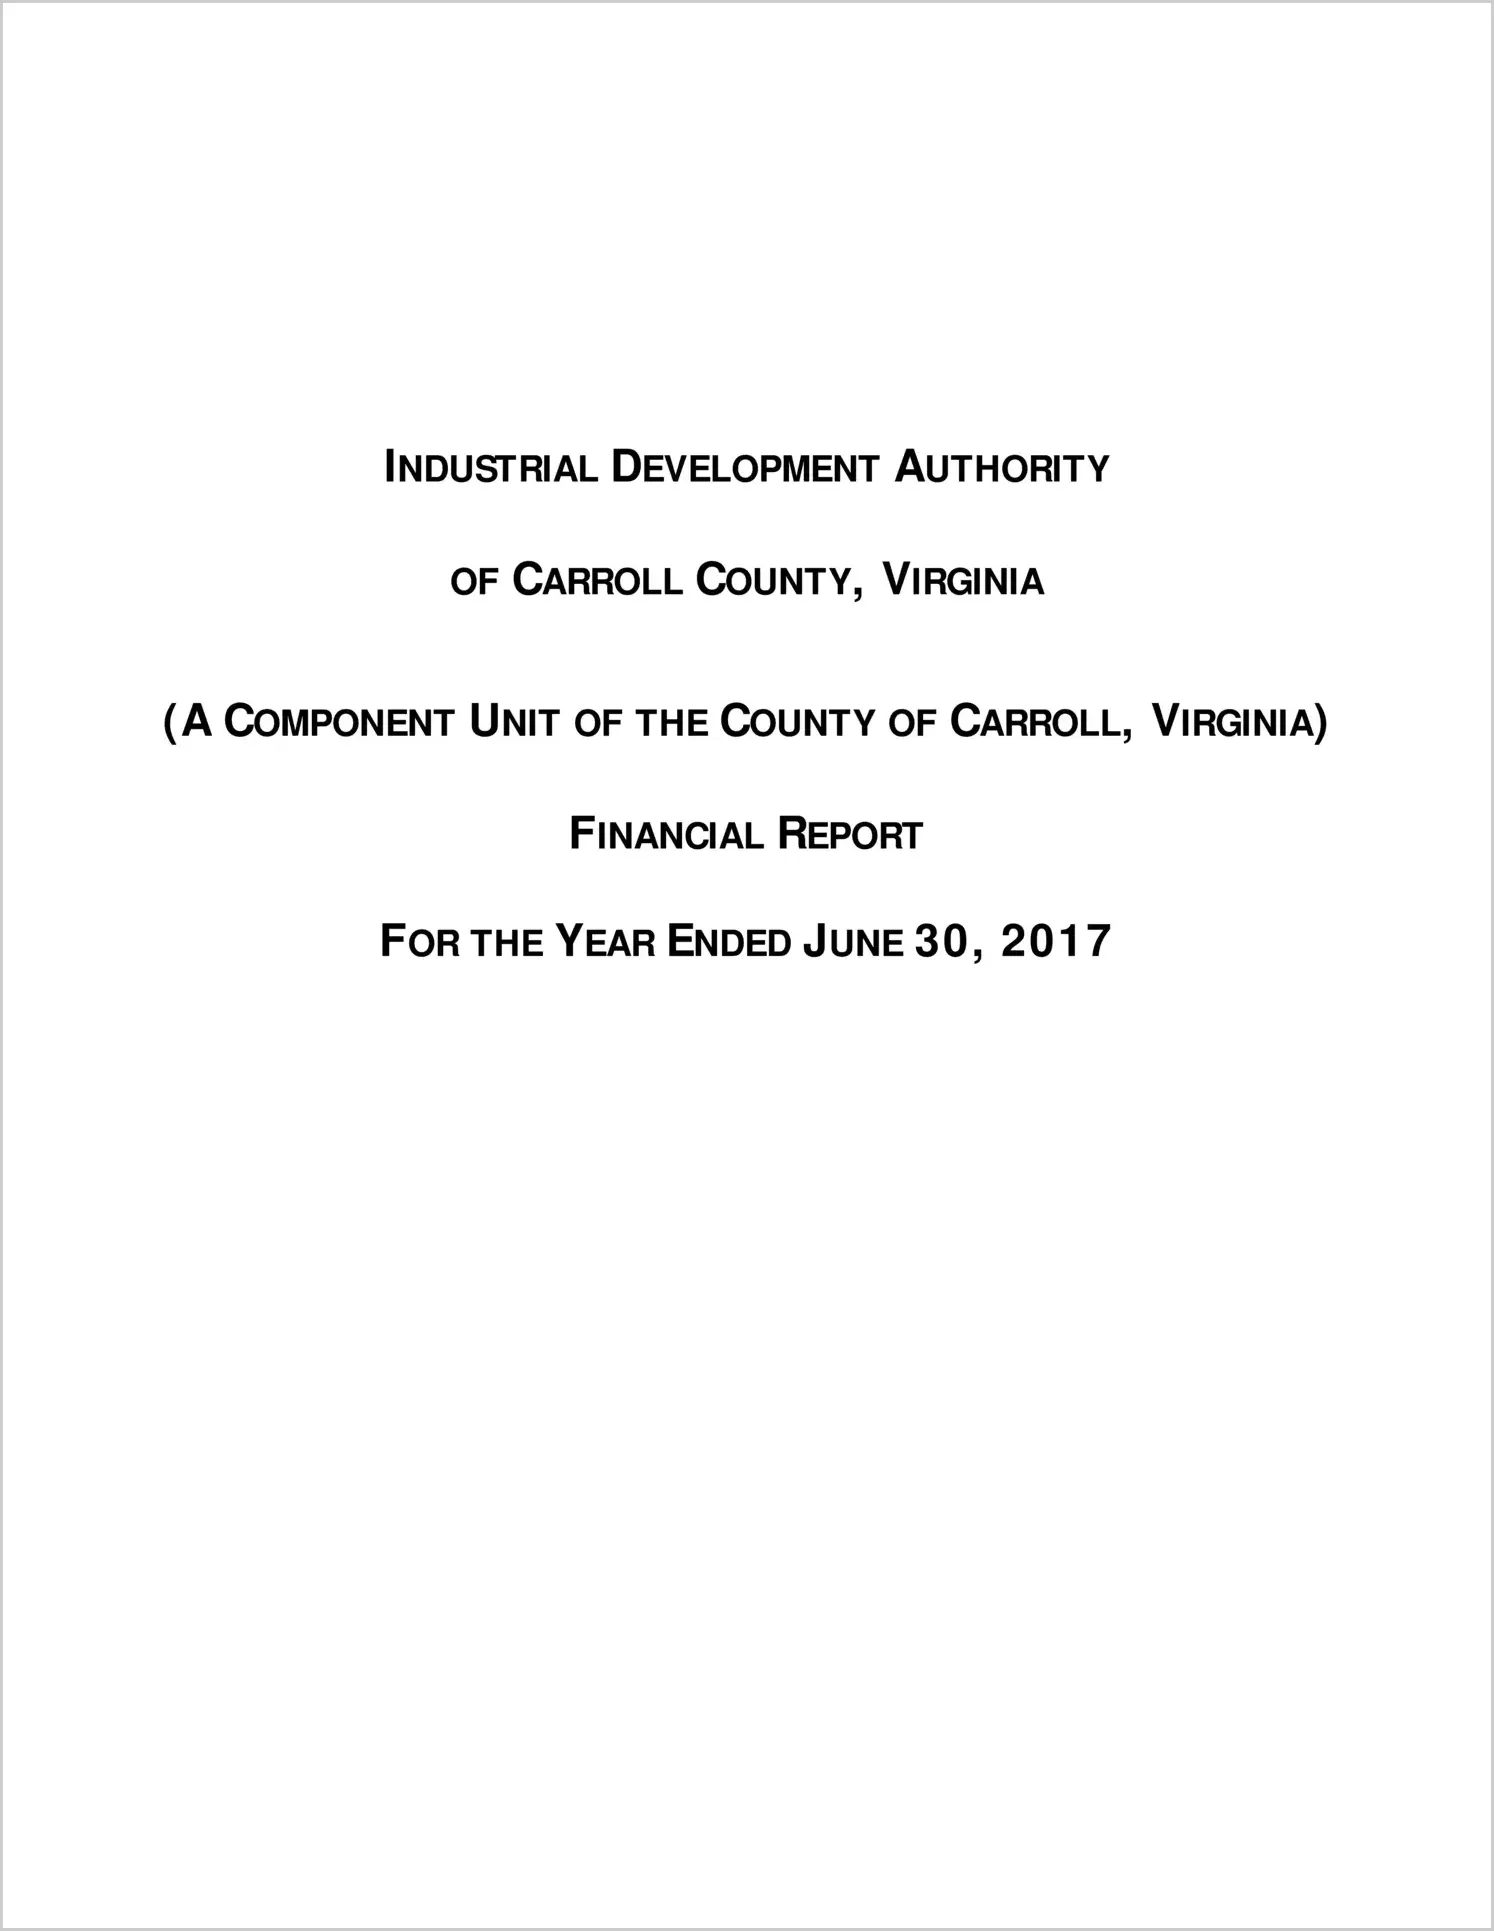 2017 ABC/Other Annual Financial Report  for Carroll County Industrial Development Authority